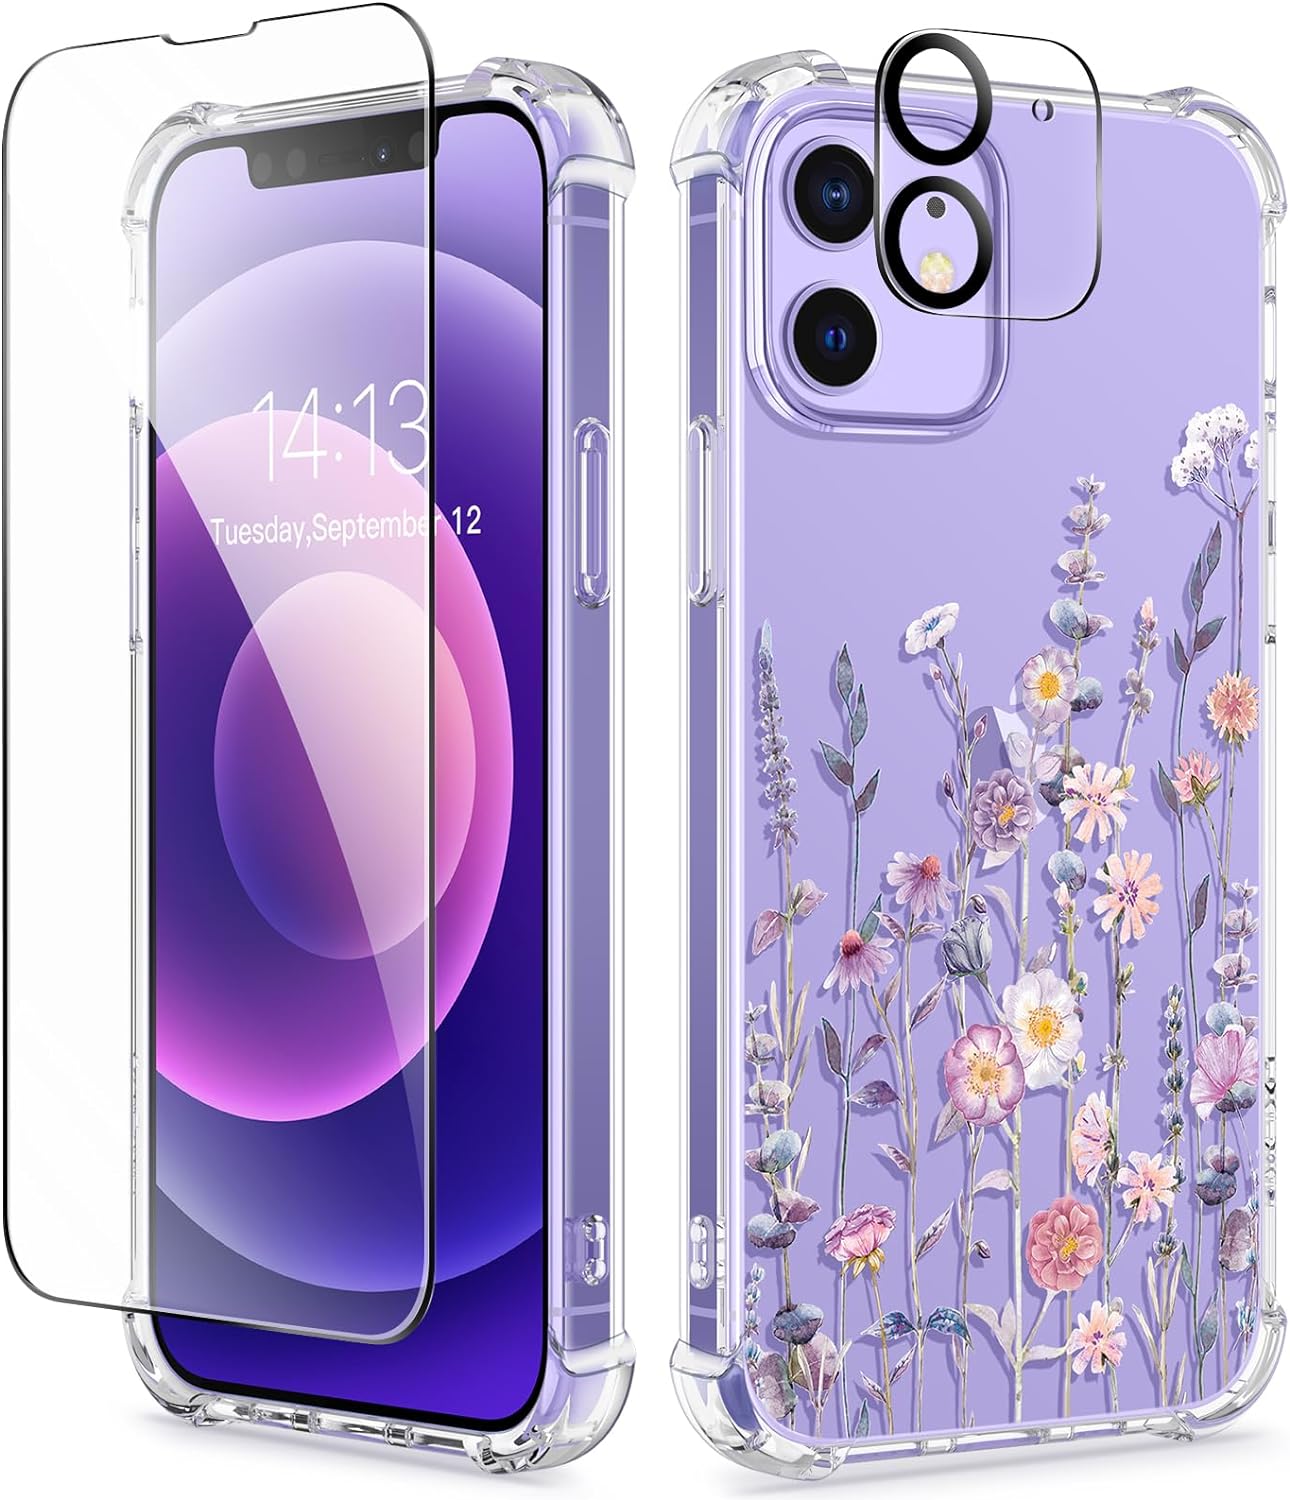 GVIEWIN for iPhone 12 Case and iPhone 12 Pro Case with Screen Protector + Camera Lens Protector, Clear Flexible TPU Shockproof Cover Women Girls Flower Pattern Phone Case 6.1 (Floratopia/Colorful)